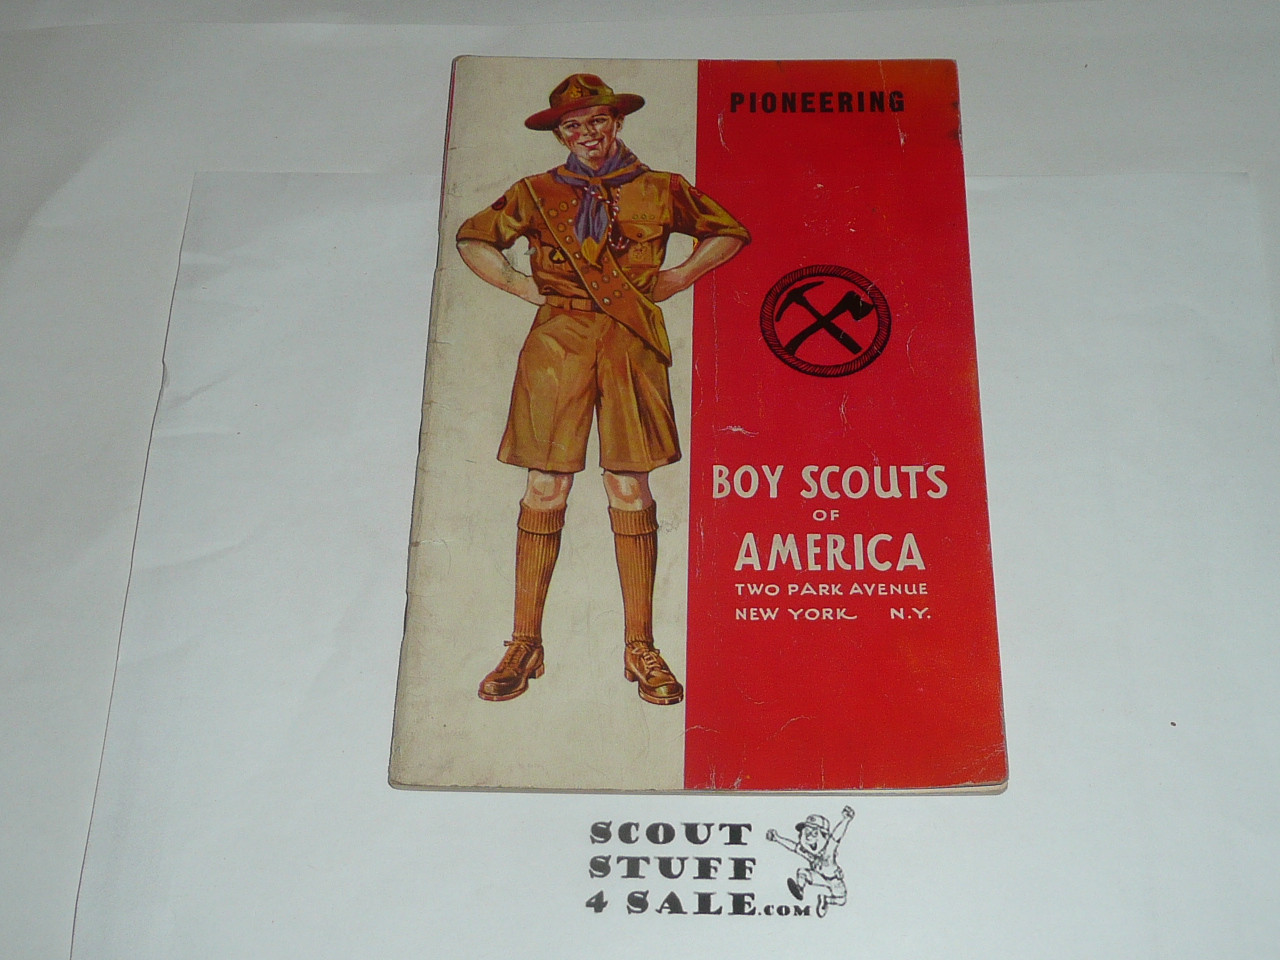 Pioneering Merit Badge Pamphlet, Type 4, Standing Scout Cover, 6-41 Printing